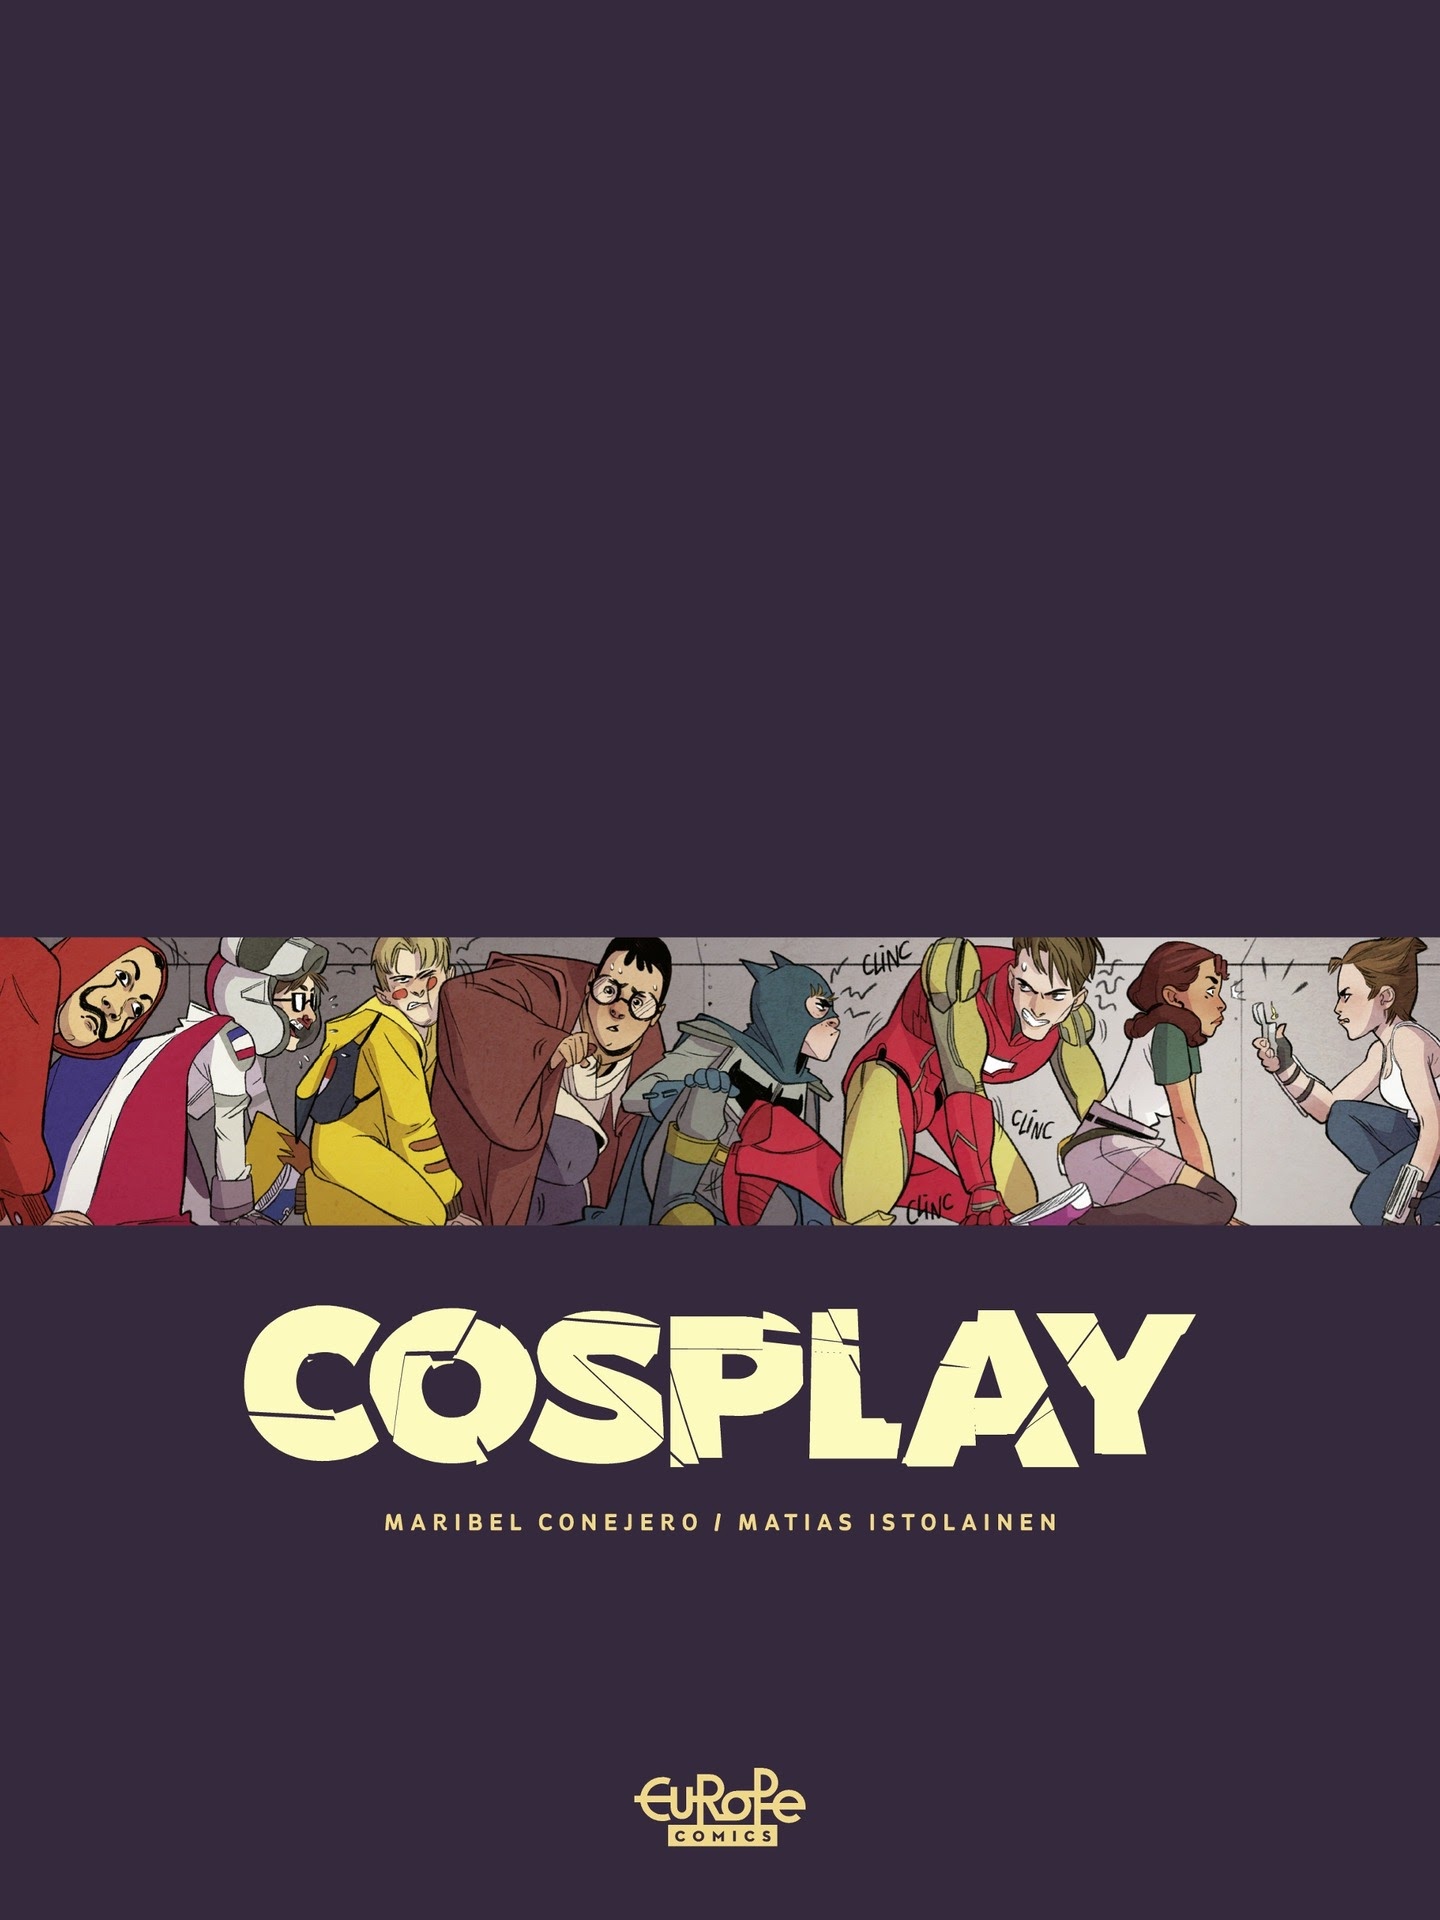 Read online Cosplay comic -  Issue # TPB - 2